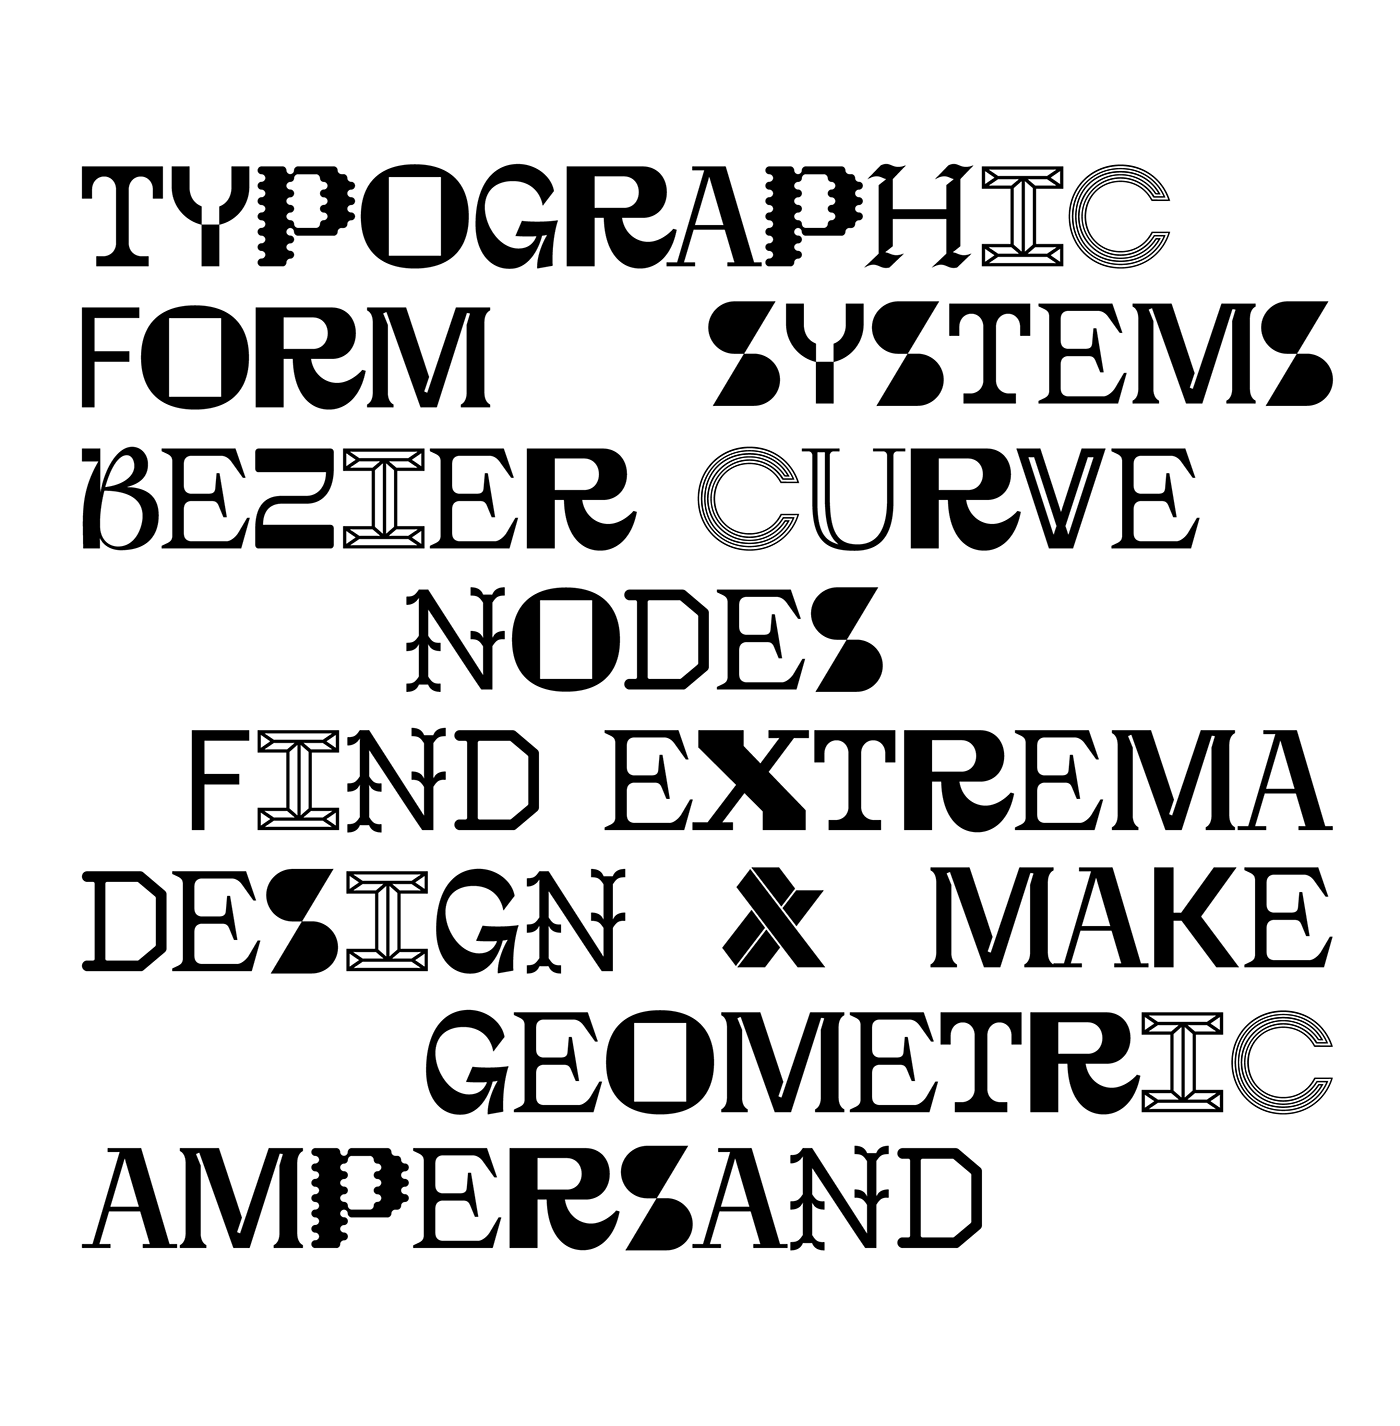 36 days of type 36 hours of type exercise glyphs letterforms purple thirty-six type design typography   variable